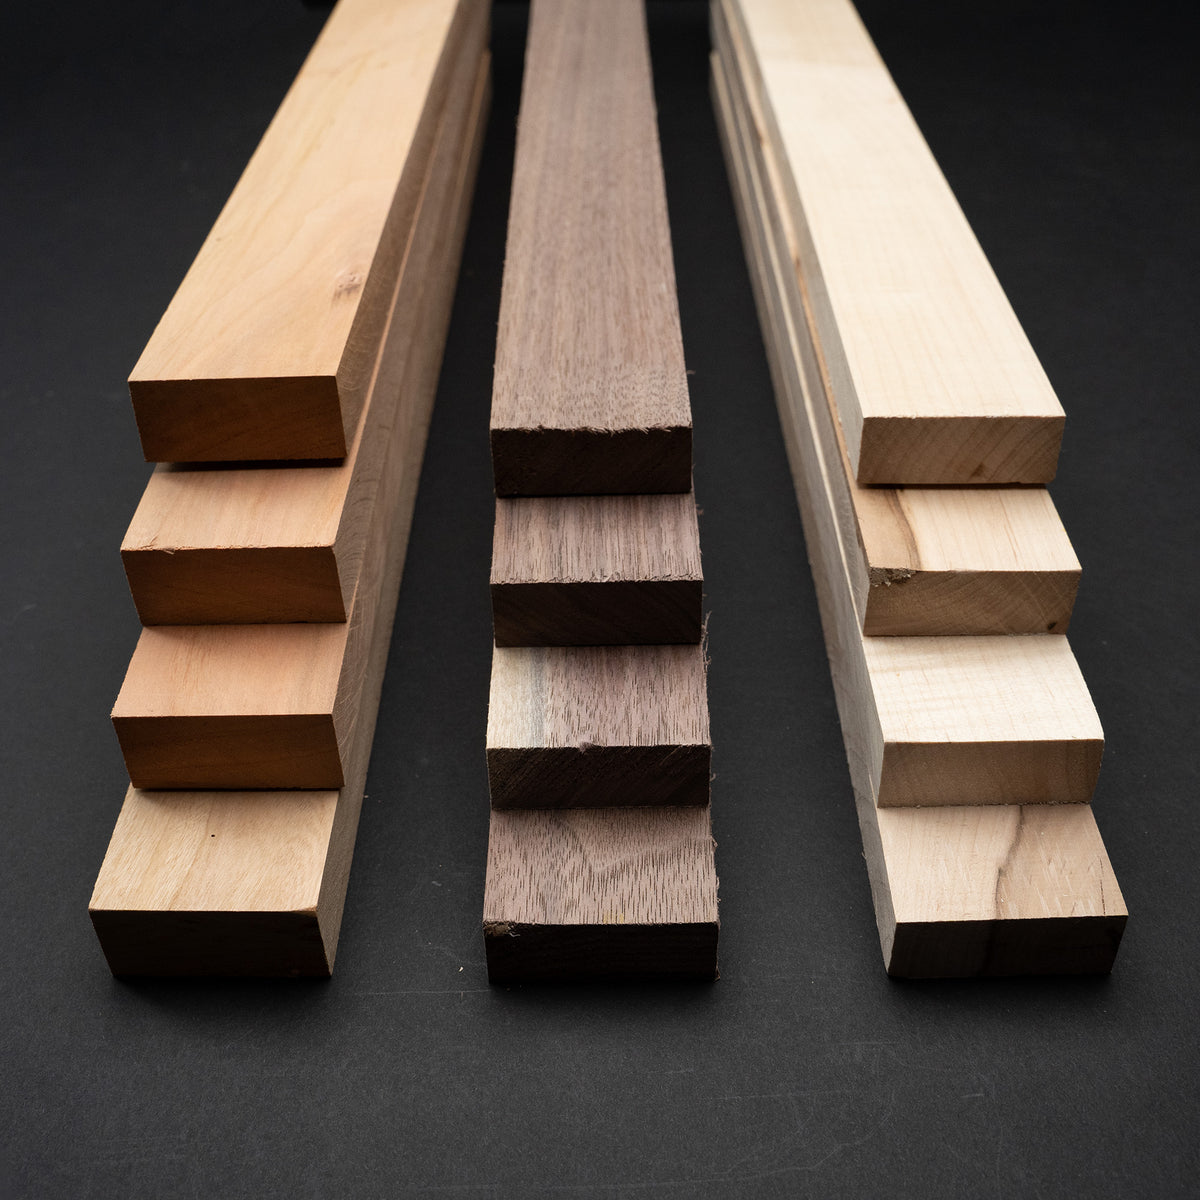 3/4&quot; x 2&quot; x 24&quot; COMBO 4 WALNUT 4 Hard Maple 4 Cherry DIY Cutting Board Butcher Block Charcuterie Cheese Boards Tray Boards